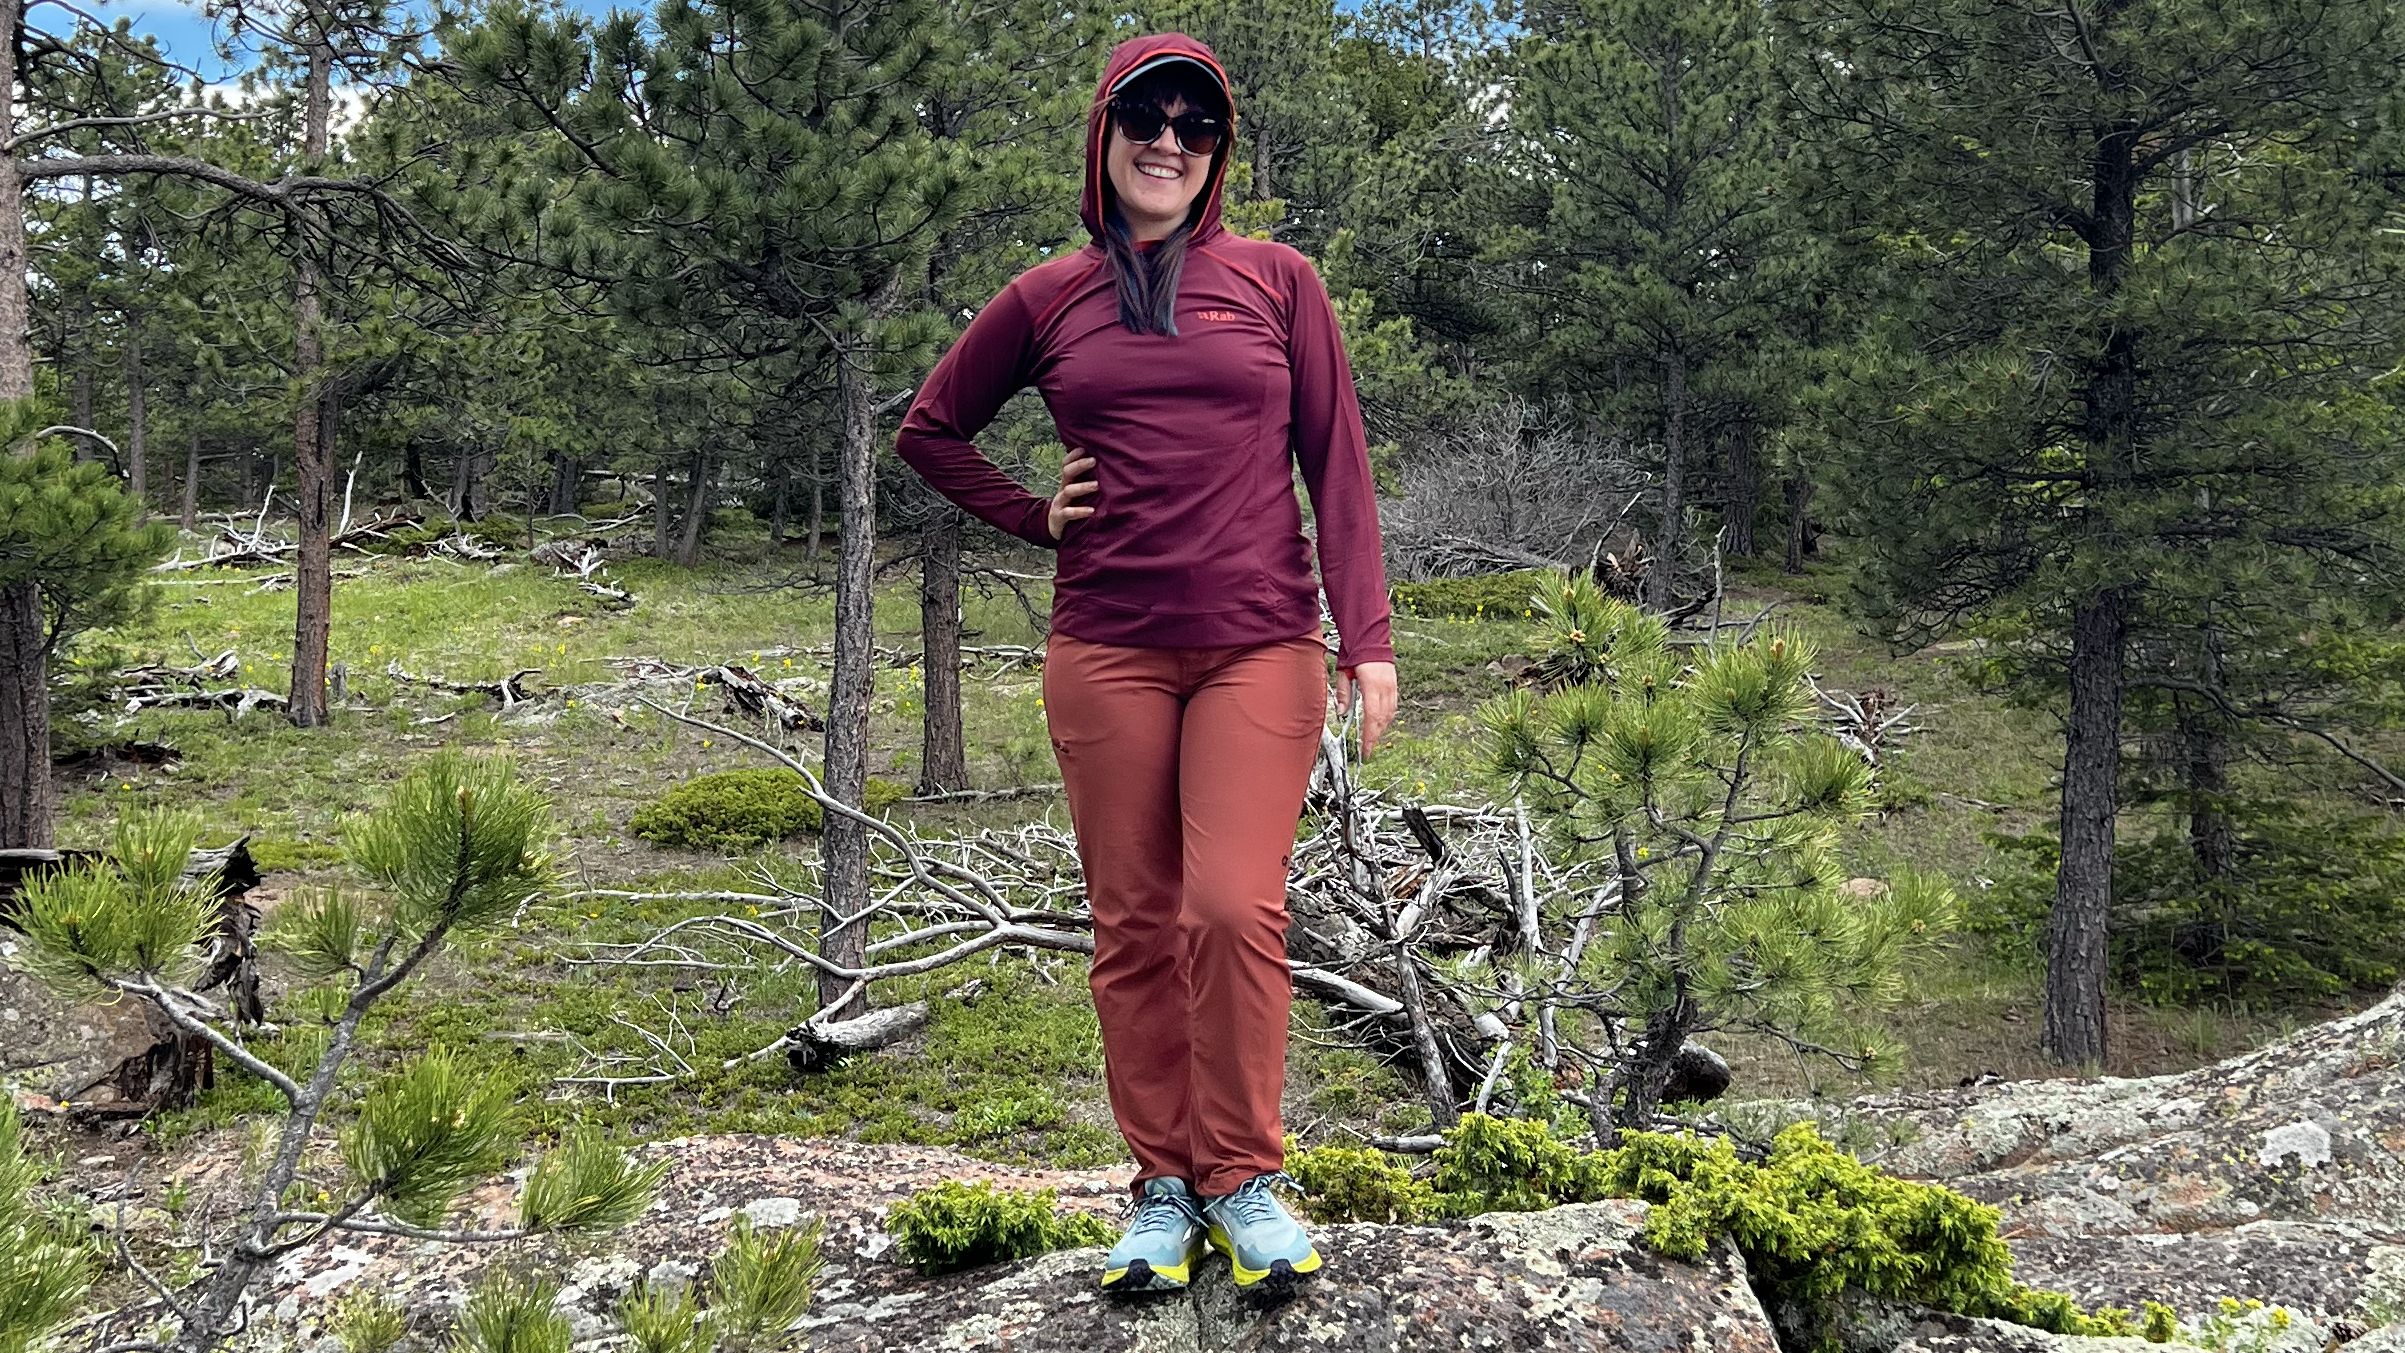 Rab Force Hoody review: A breathable sun shirt | CNN Underscored